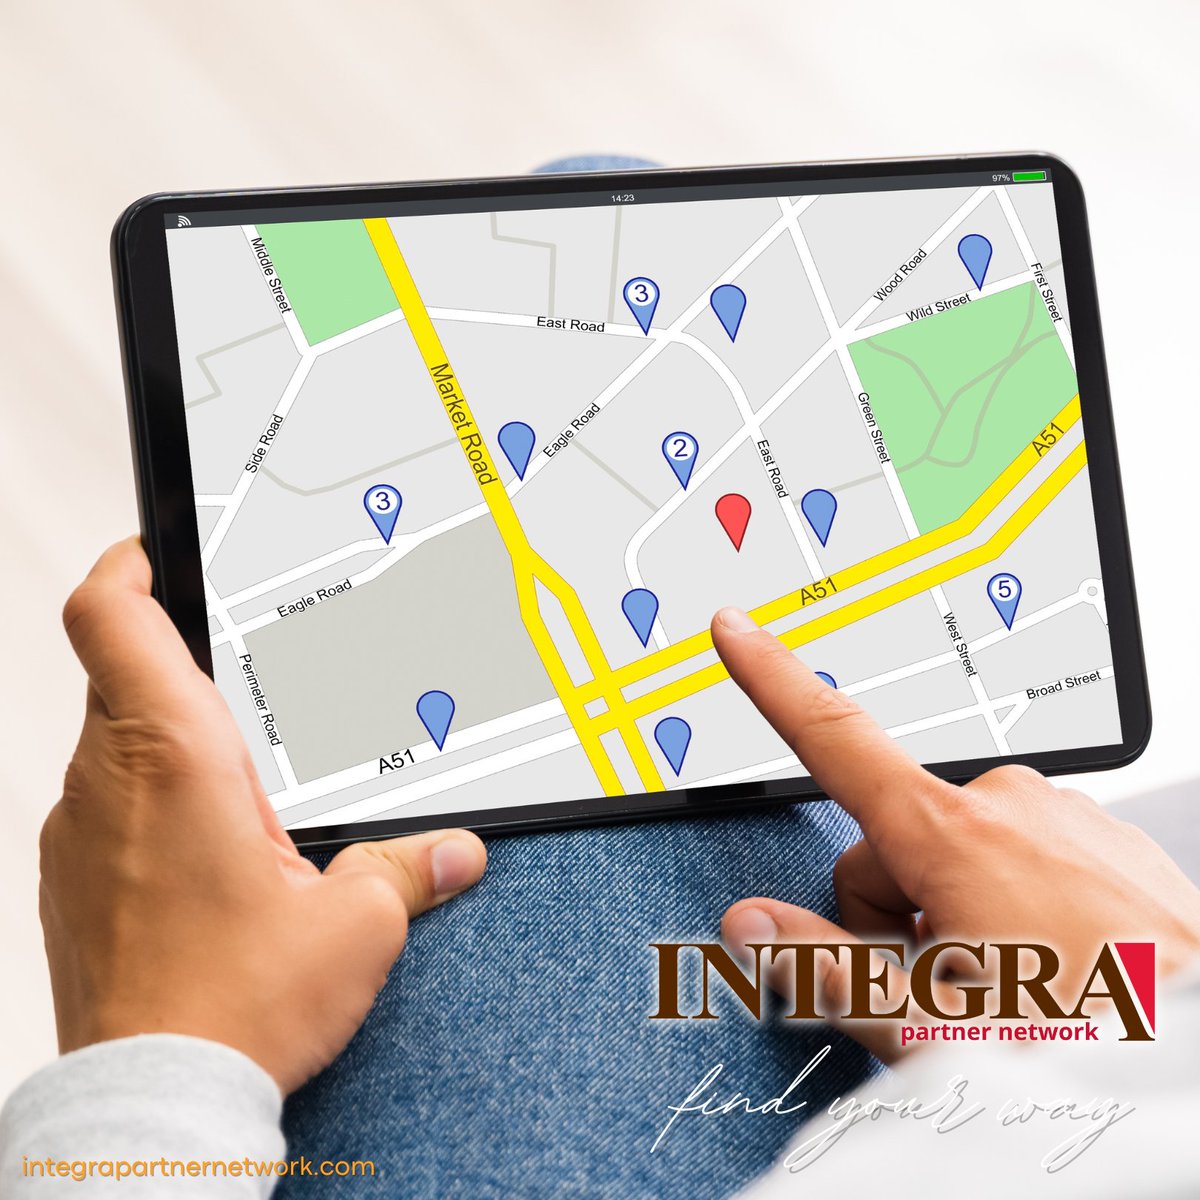 Find your way to success, your way, as an independent insurance agent! Find your way to the Integra Partner Network. 

#independentagent #insurance #independentagency #integra #integrapartnernetwork #insuranceagent #insuranceagency #entrepreneur #success